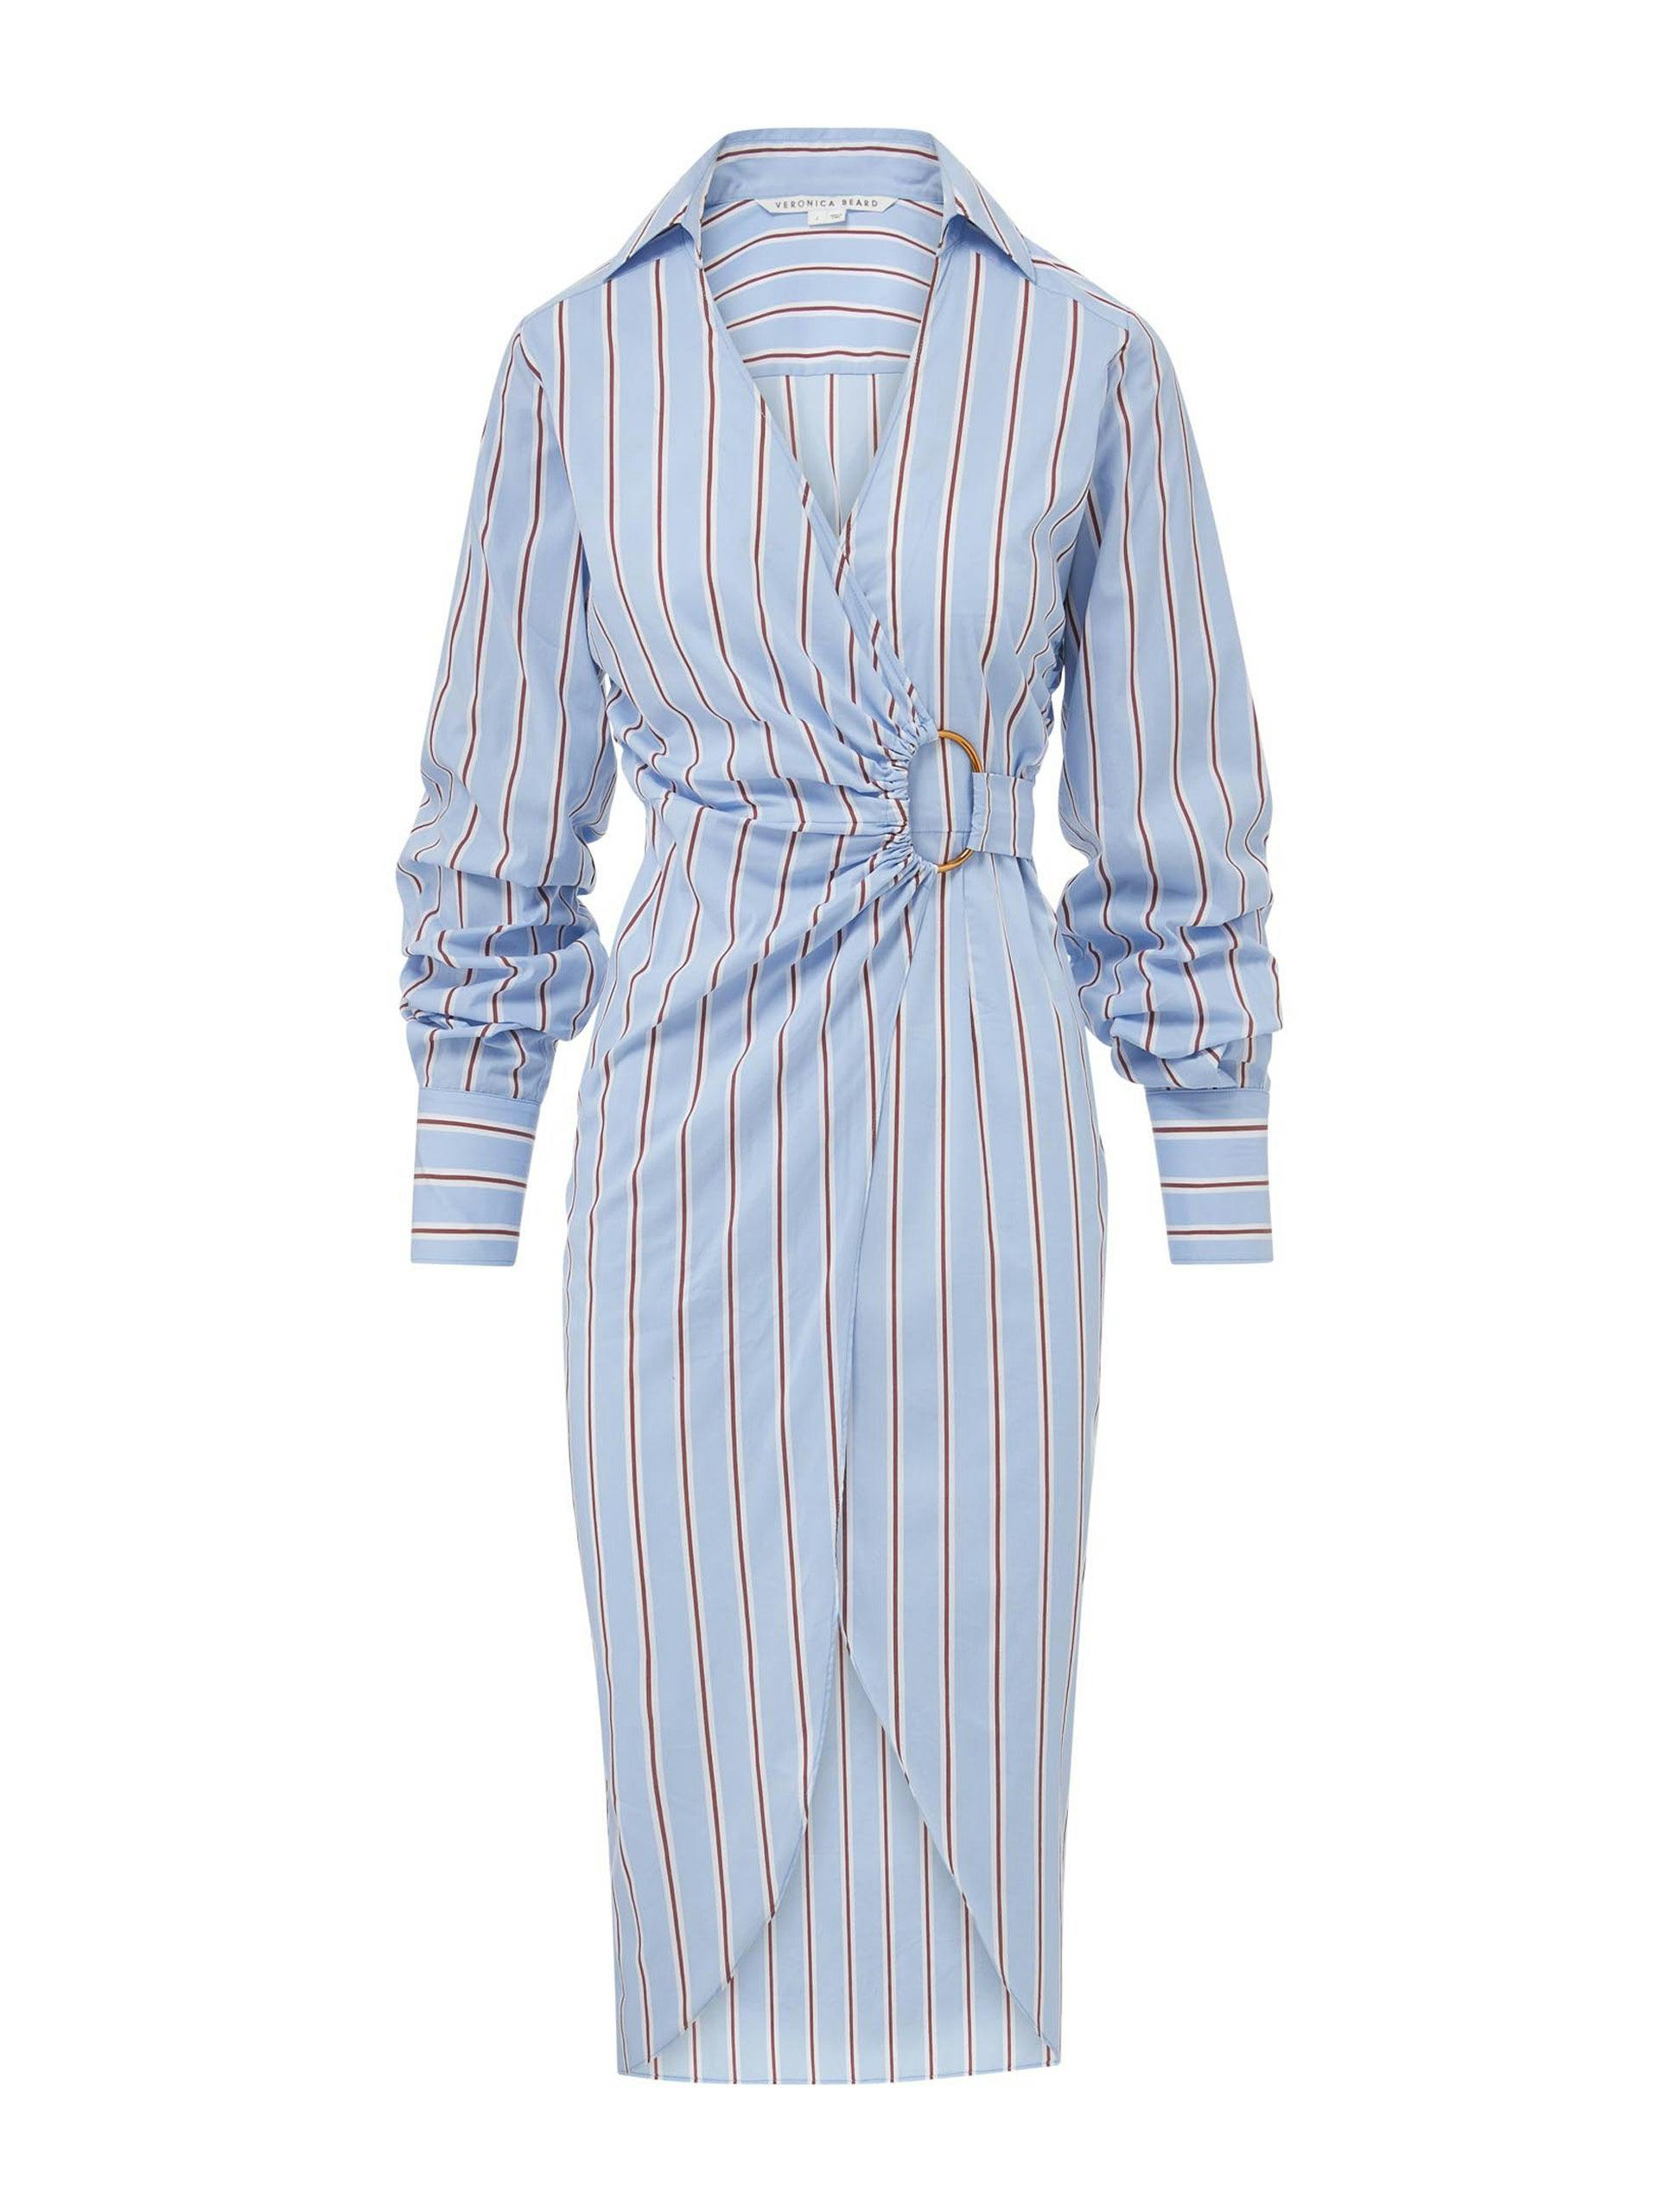 Blue striped shirt dress with gold buckle